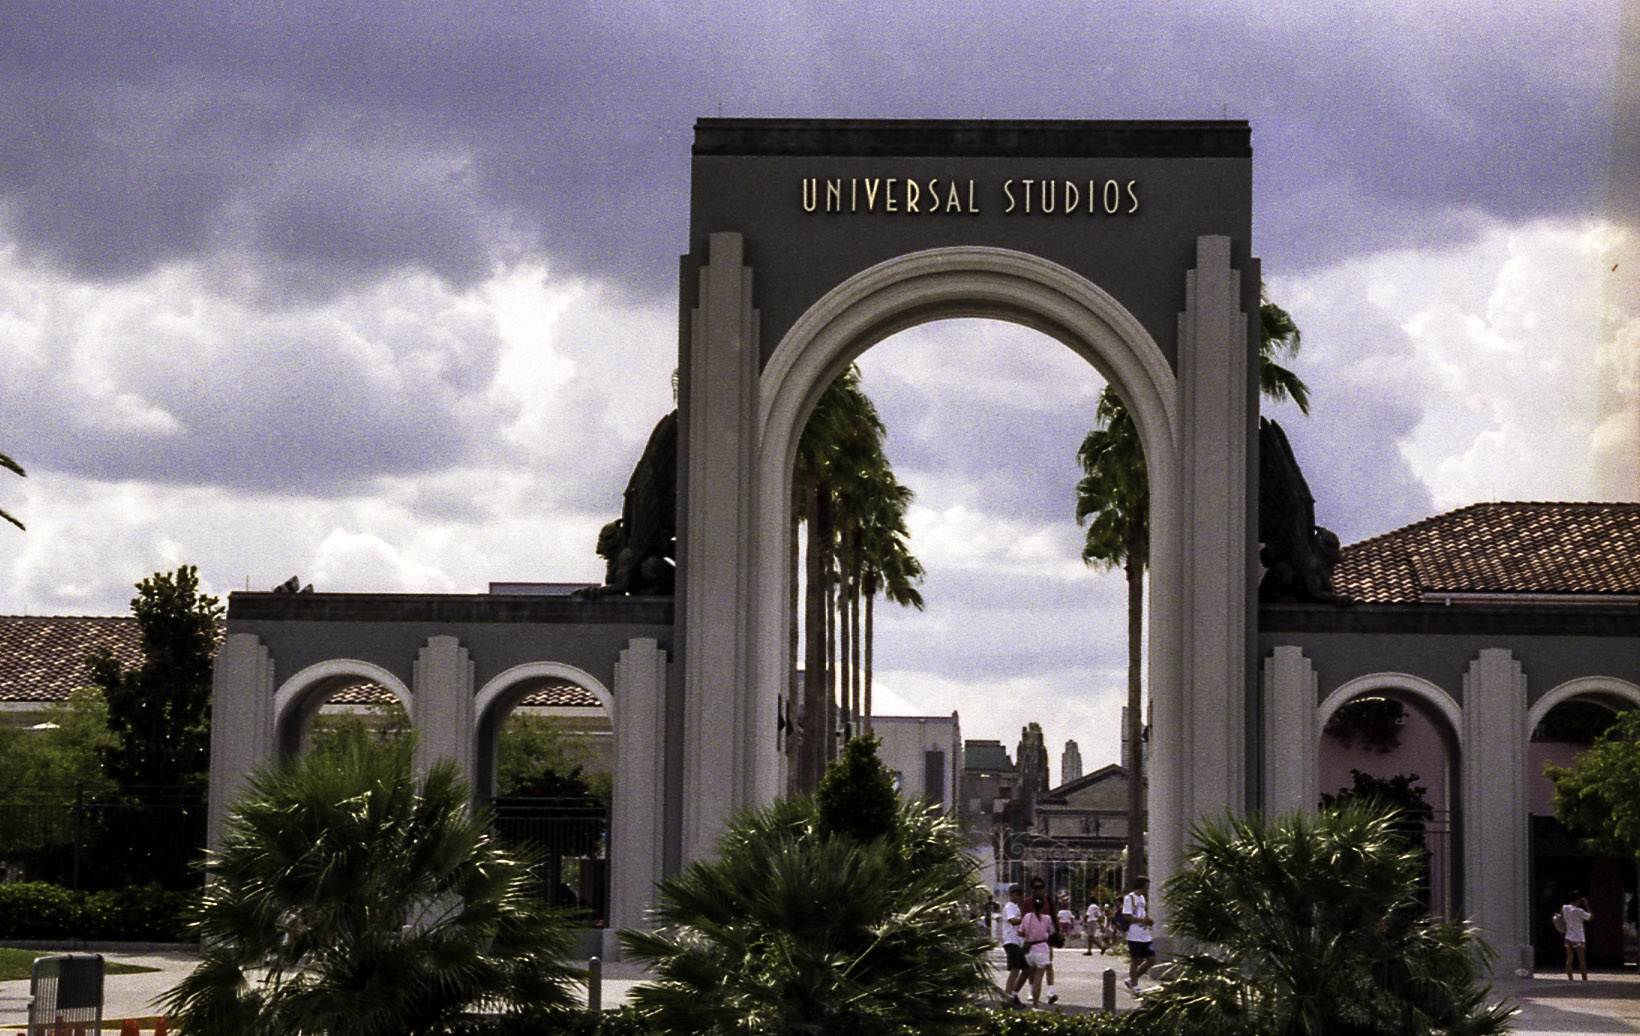 The original entrance to the theme park at Universal Studios in Orlando